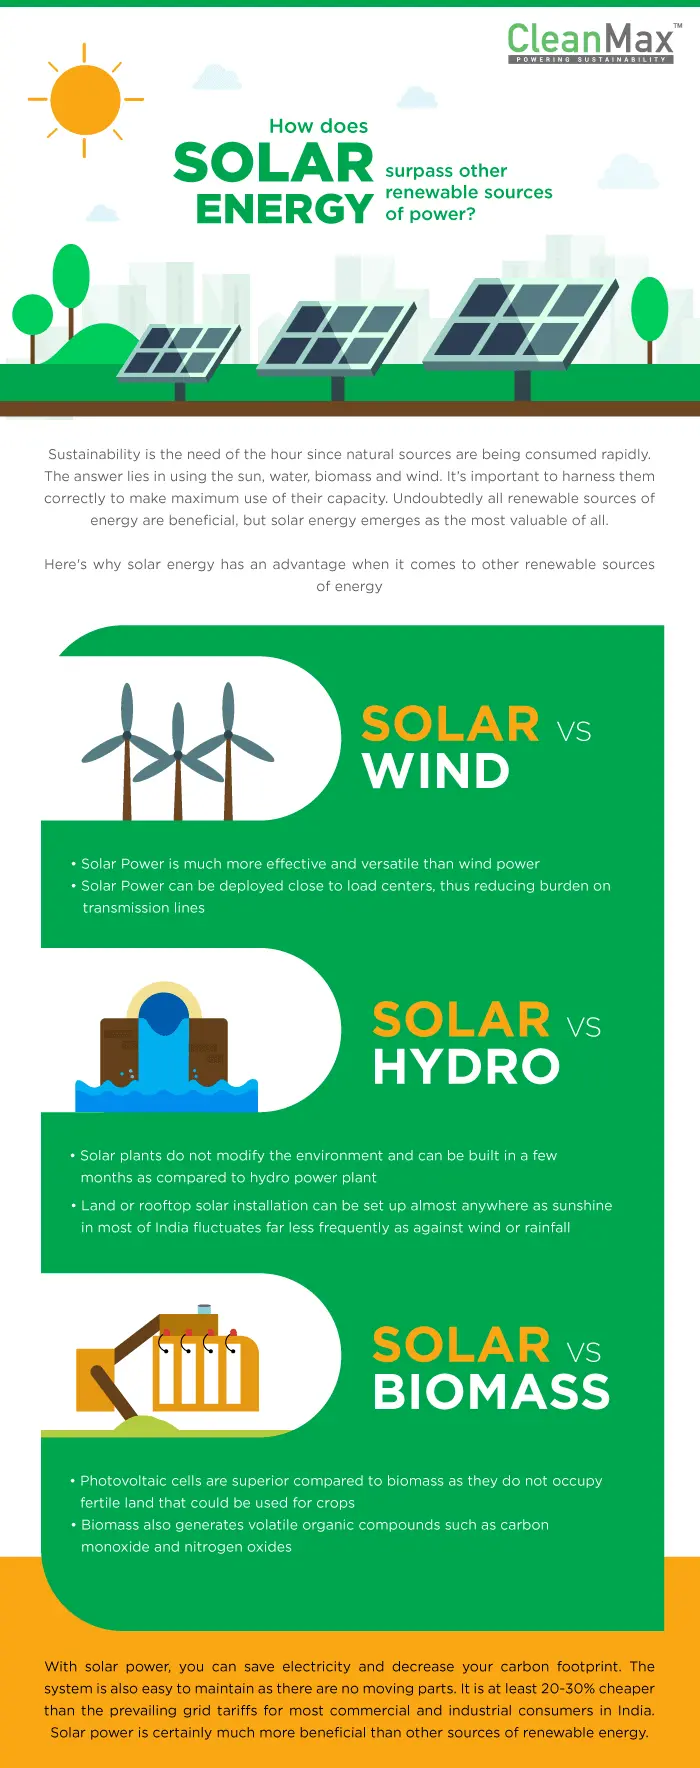 advantages of solar power over alternative energy sources - What are the advantages of solar energy over wind energy